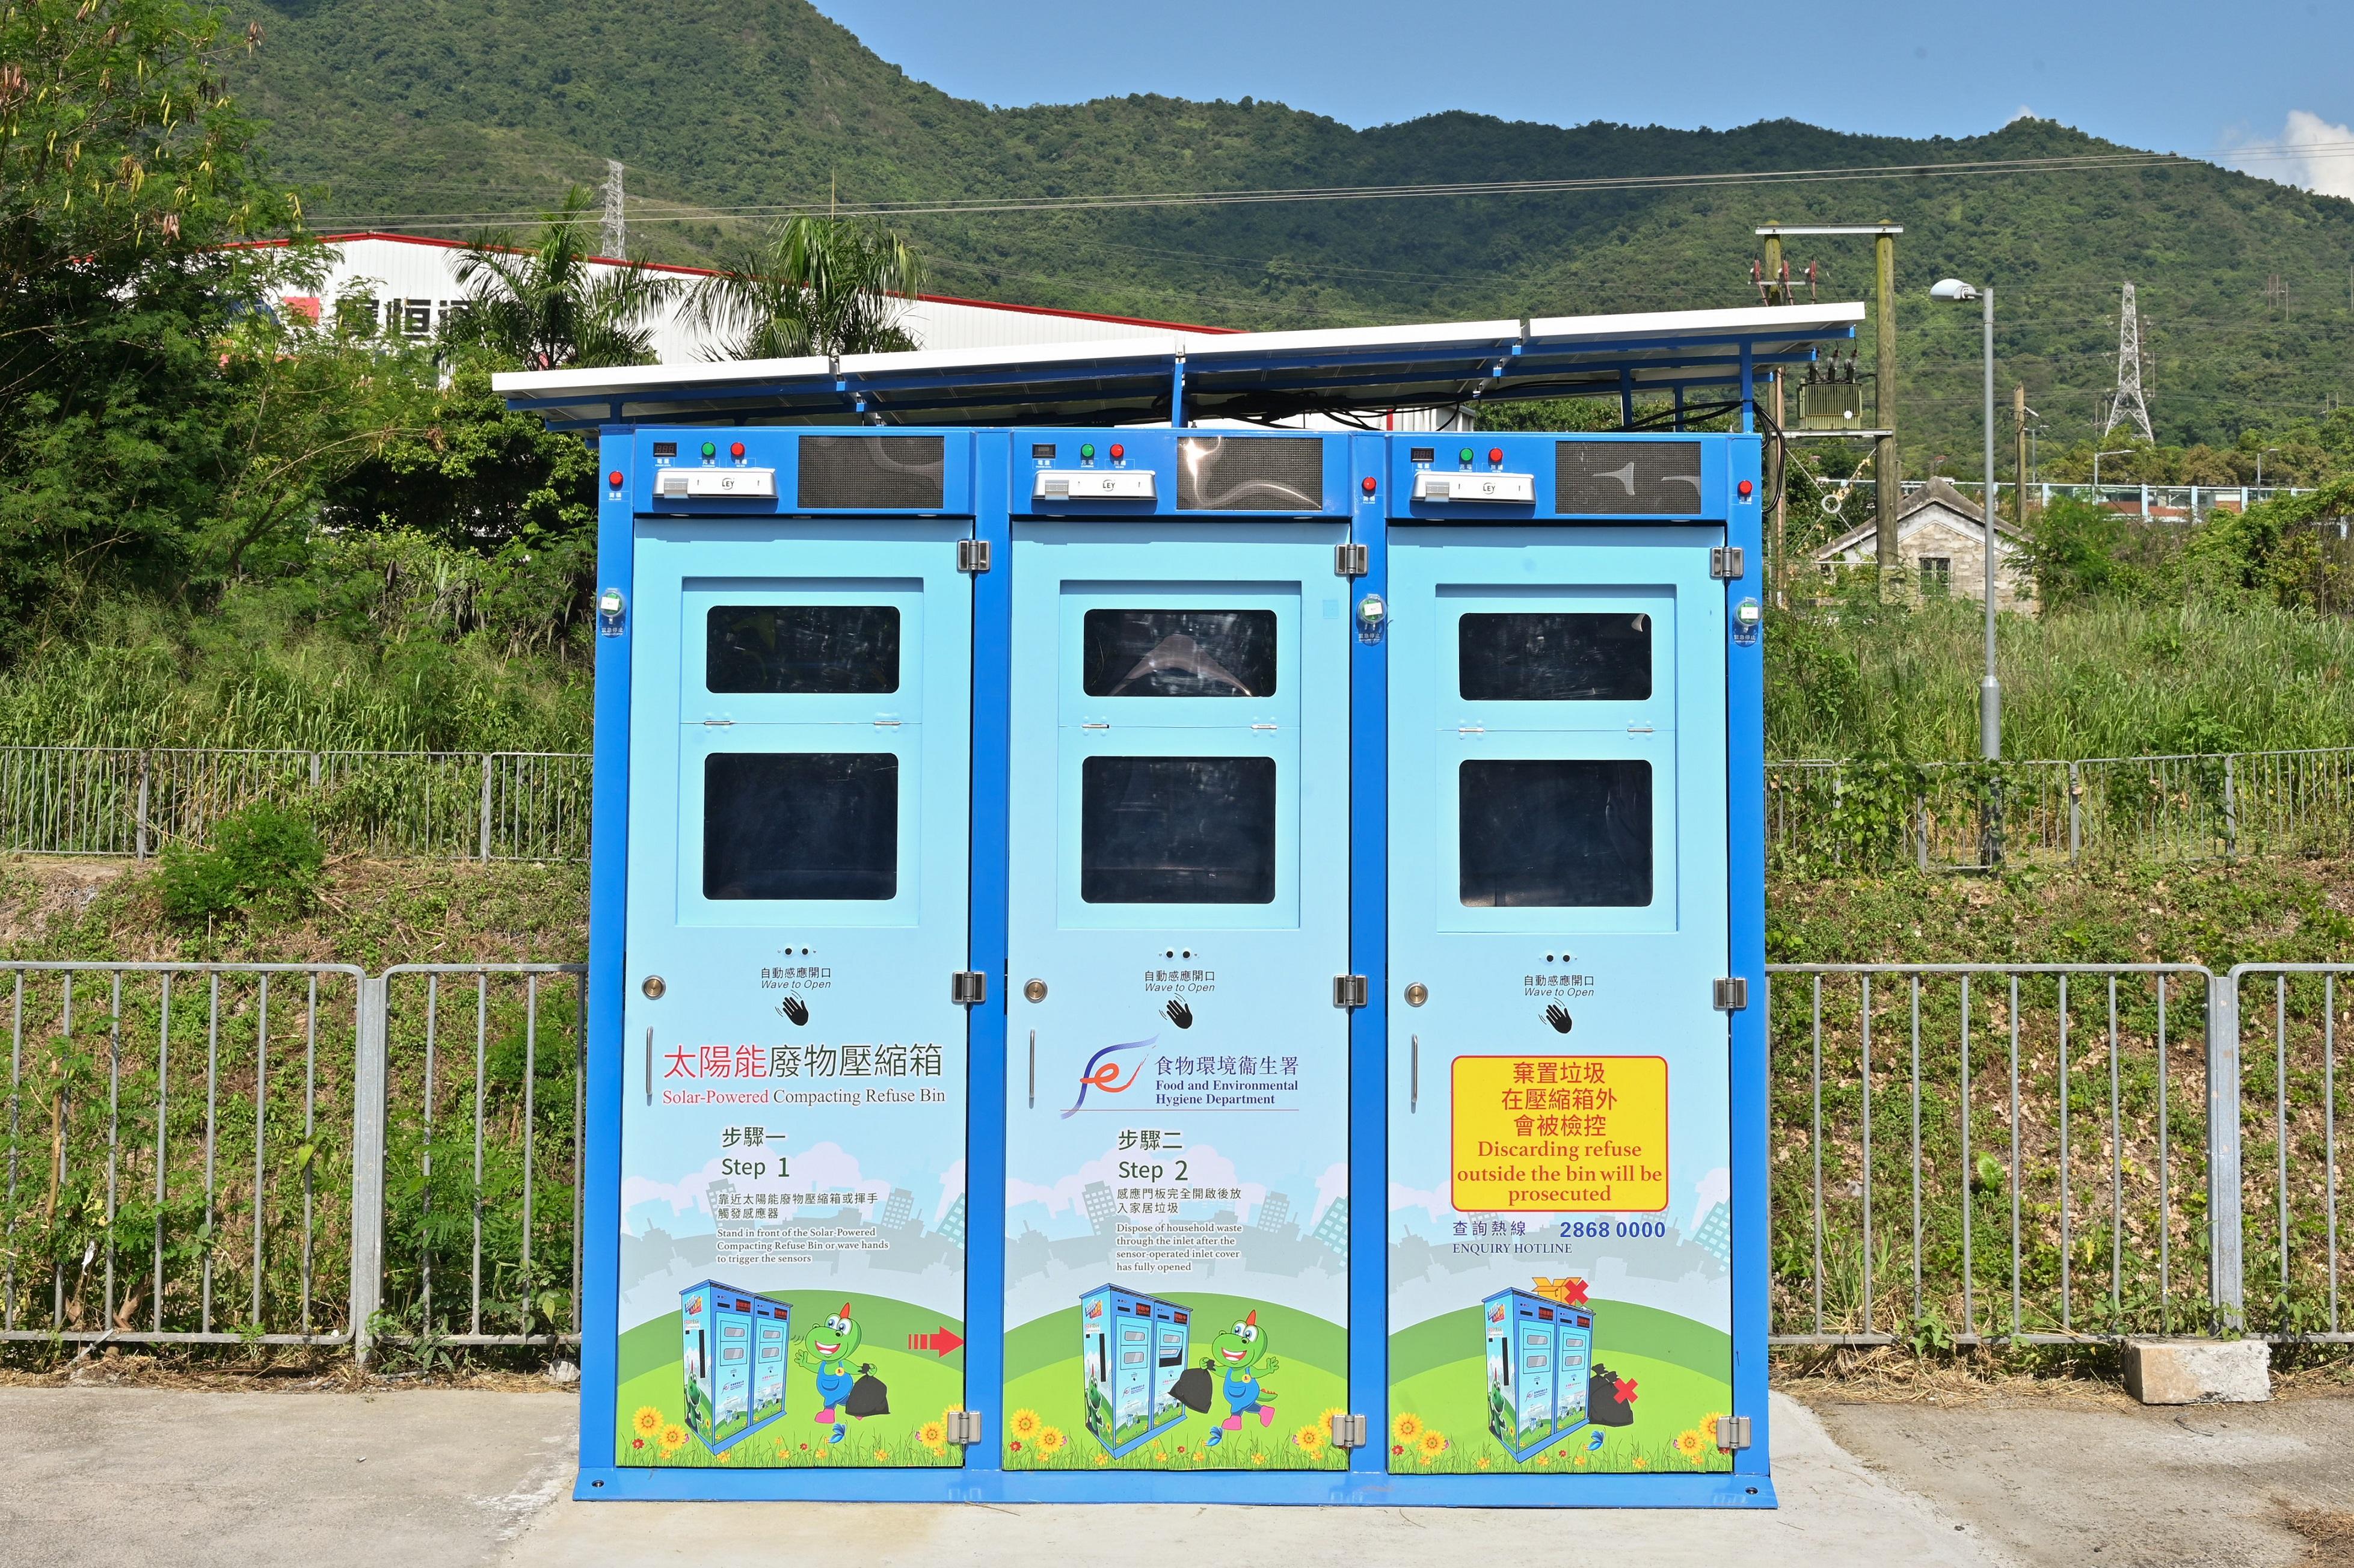 The Food and Environmental Hygiene Department announced today (June 28) that four sets of solar-powered compacting refuse bins with the latest enhancements have been installed near rural locations in Tai Po, Yuen Long and Islands Districts for operational testing, with a view to discouraging unscrupulous dumping of household refuse resulting from overloaded refuse bins, and mitigating rodent infestation and pest problems. 
